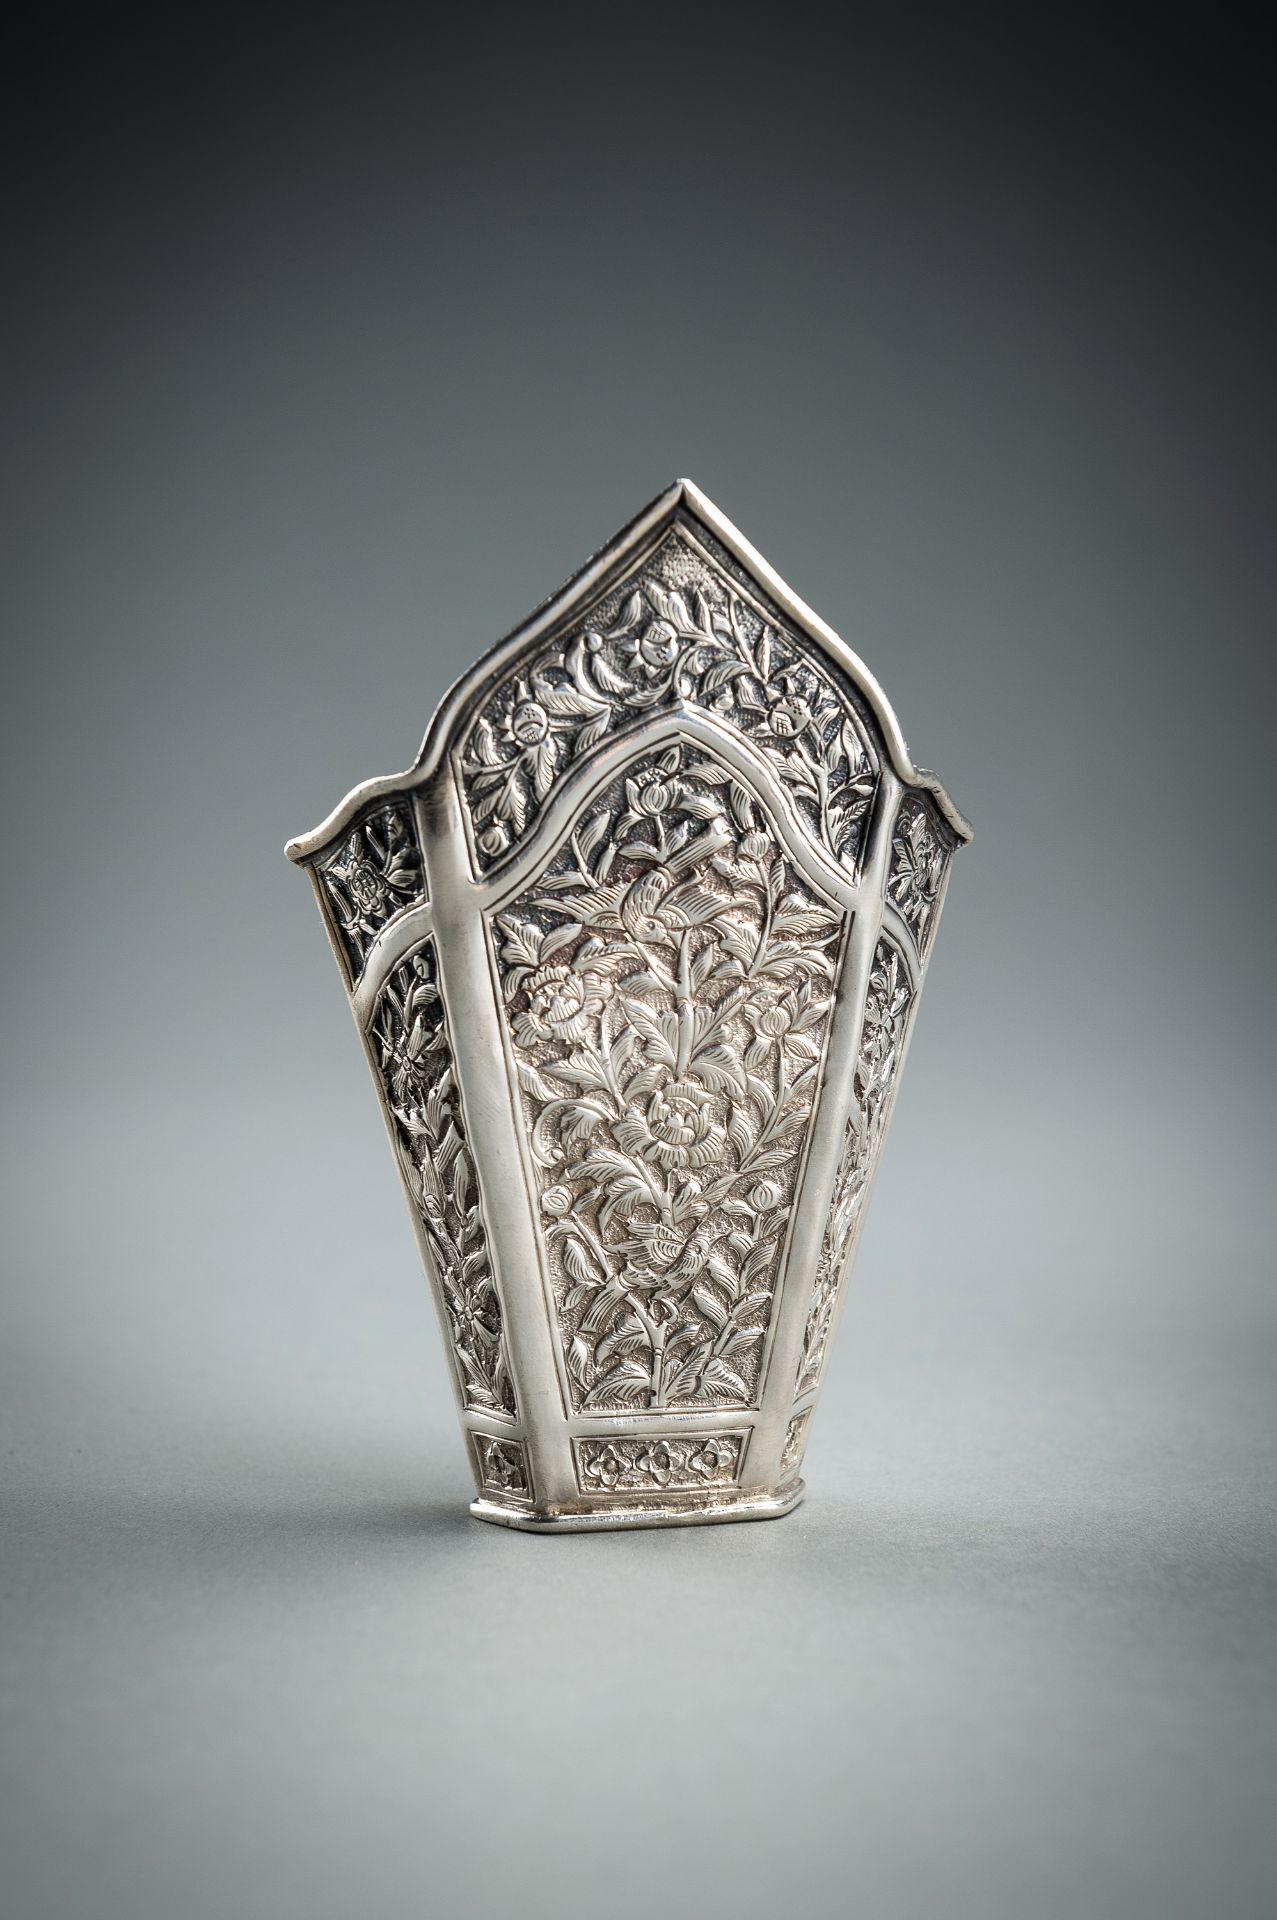 A GROUP OF FIVE EMBOSSED SILVER BETEL LEAF HOLDERS, c. 1900s - Image 19 of 19